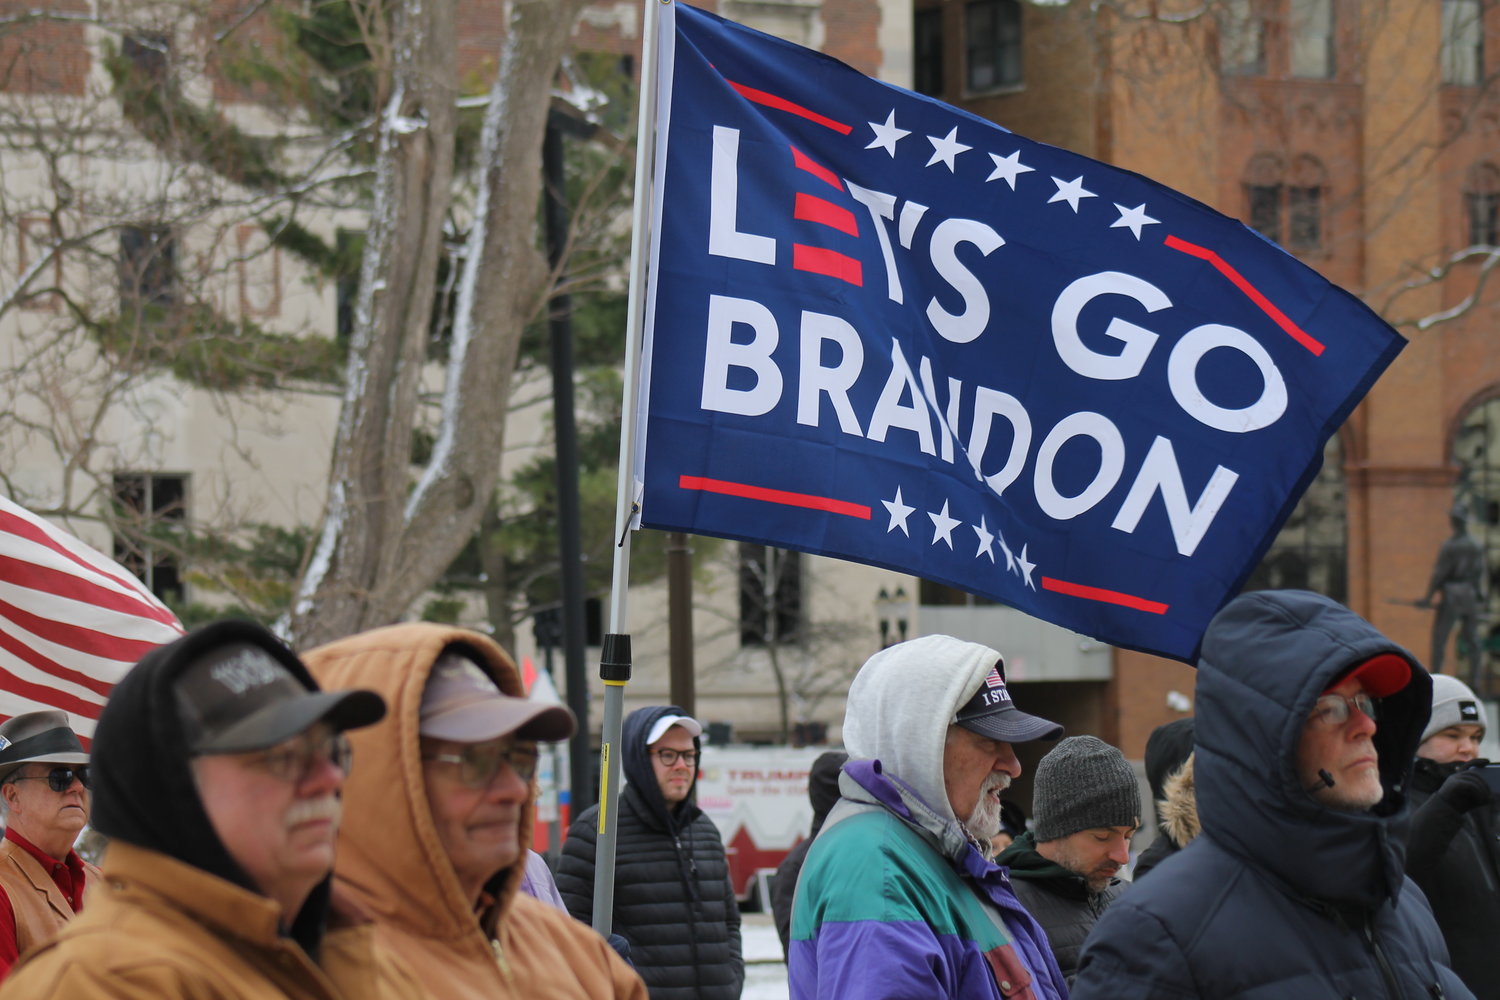 A rally goer braves freezing temperatures on Saturday (March 26) to support election conspiracies. The flag is a reference to an erroneous translation of a NASCAR chant by a commentator. The actual chant was "Fuck Joe Biden."